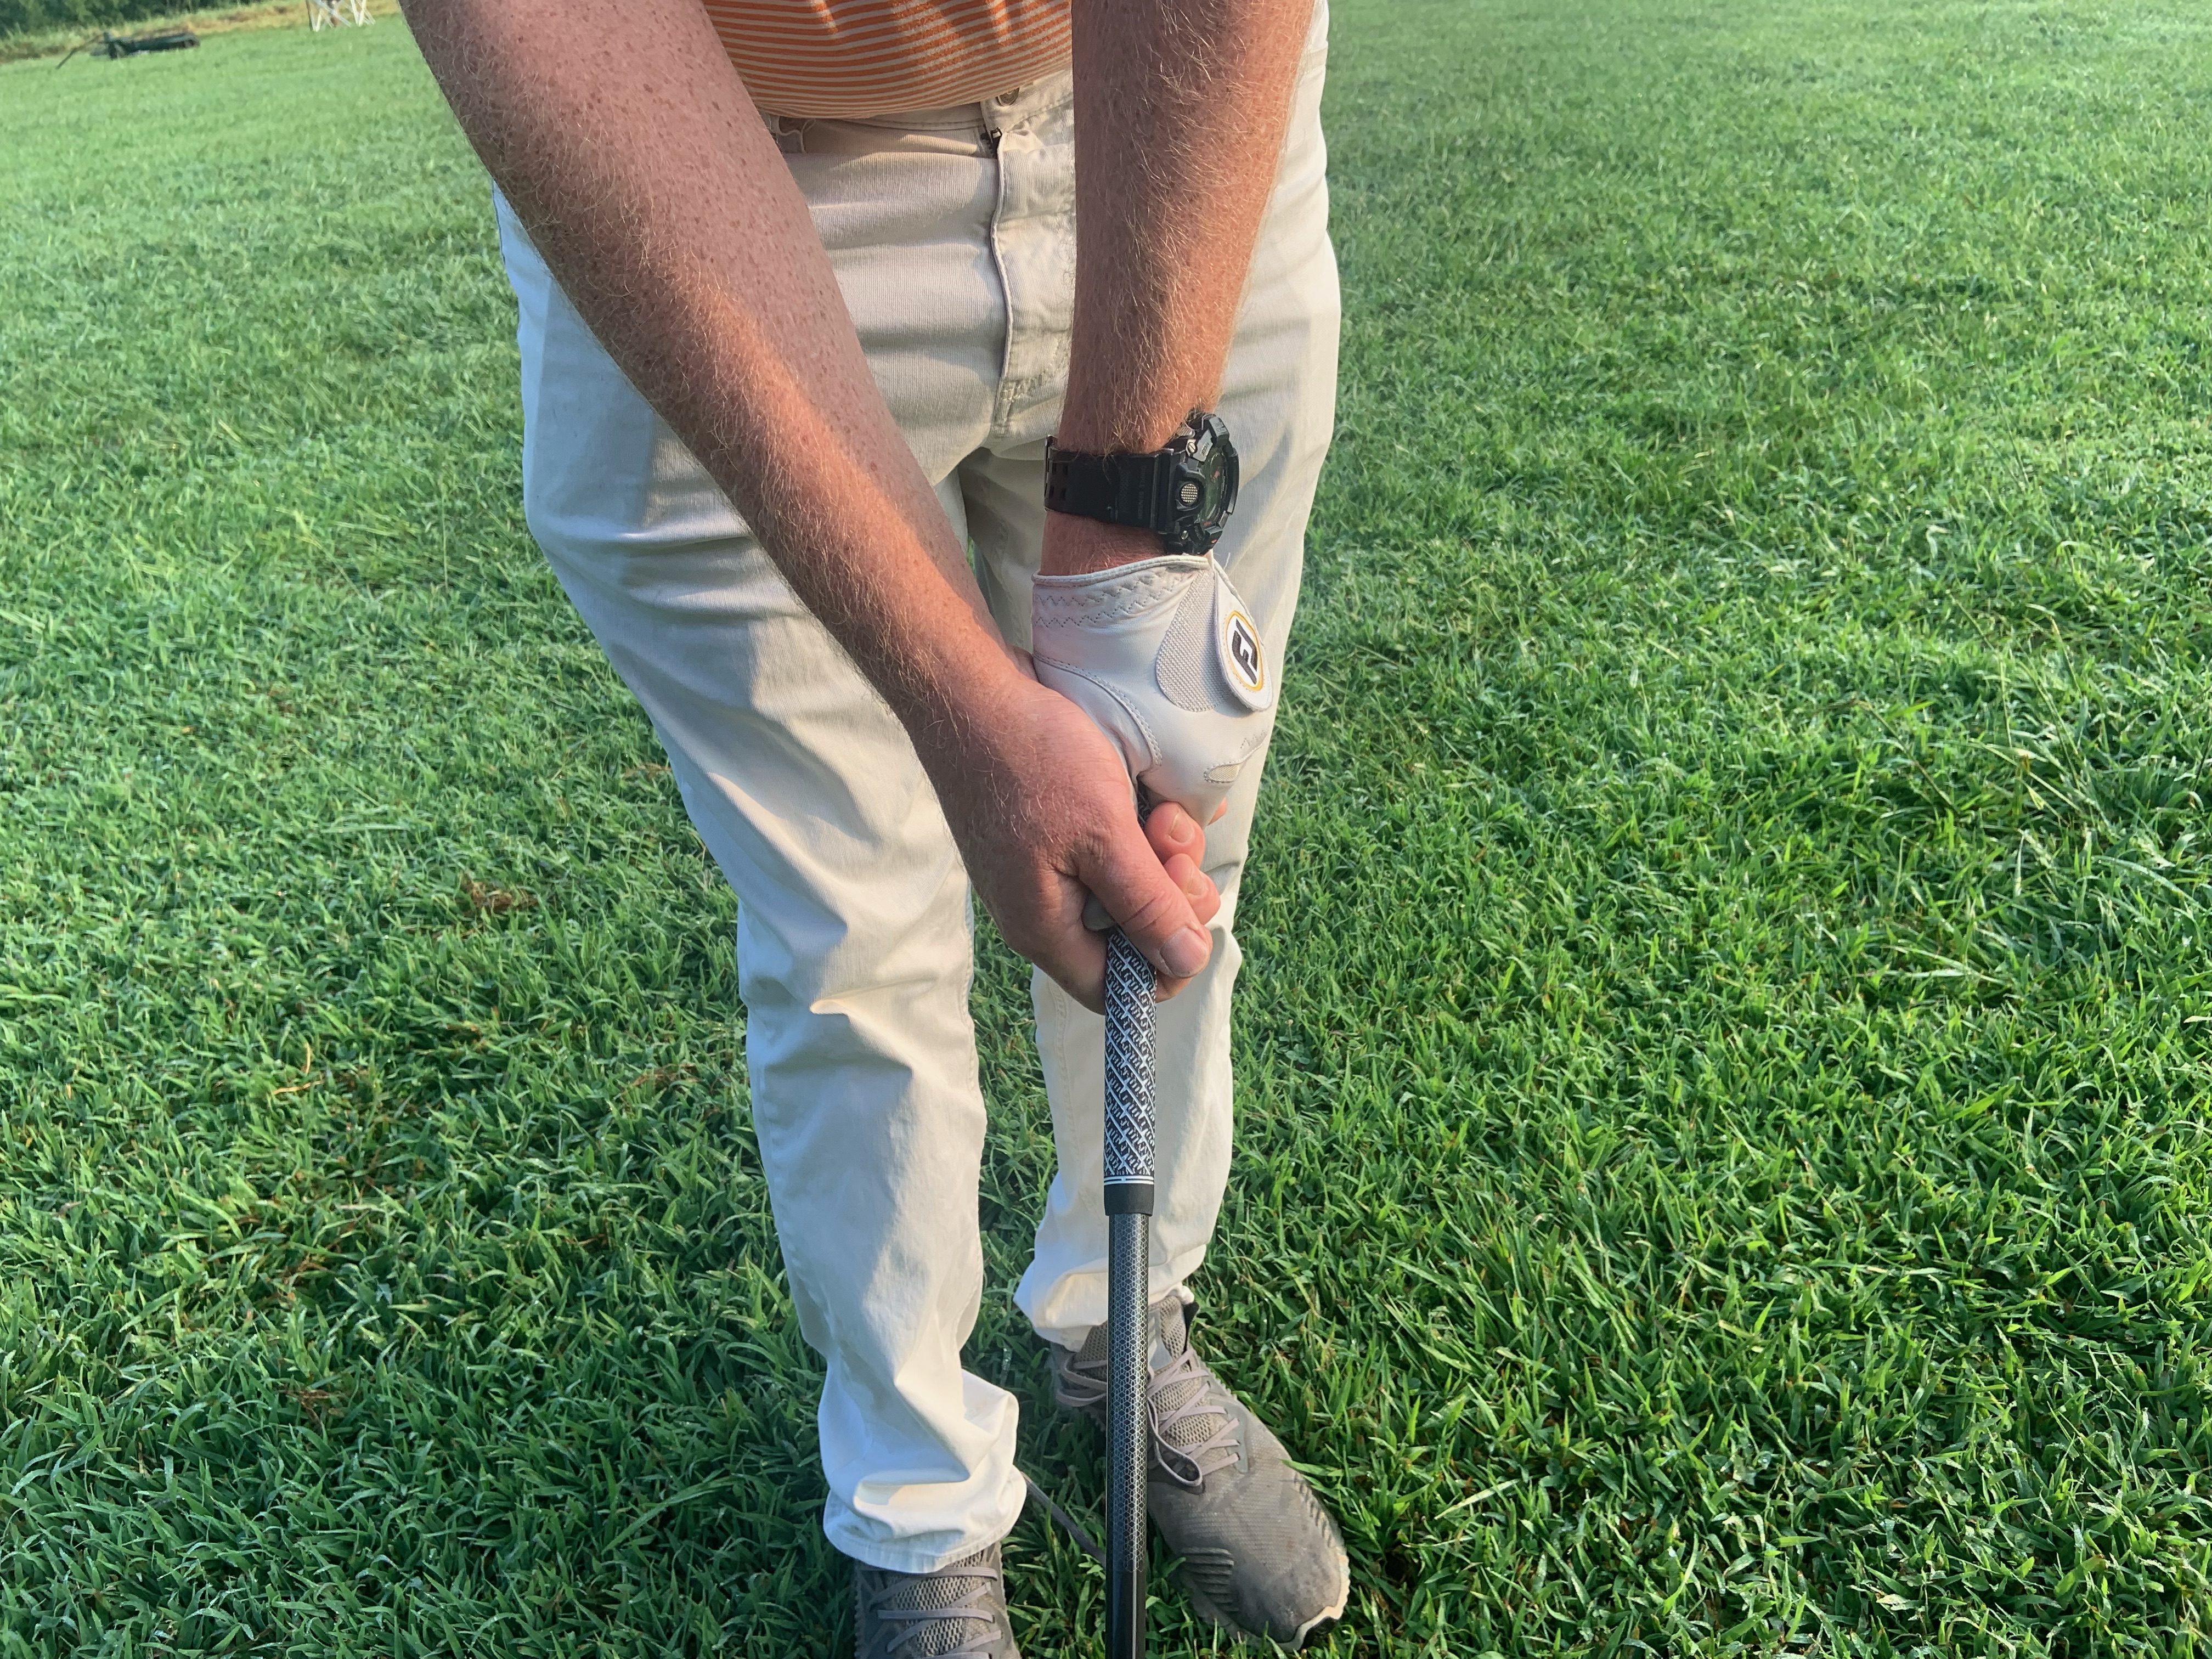 How to Hold a Golf Club Like a Pro